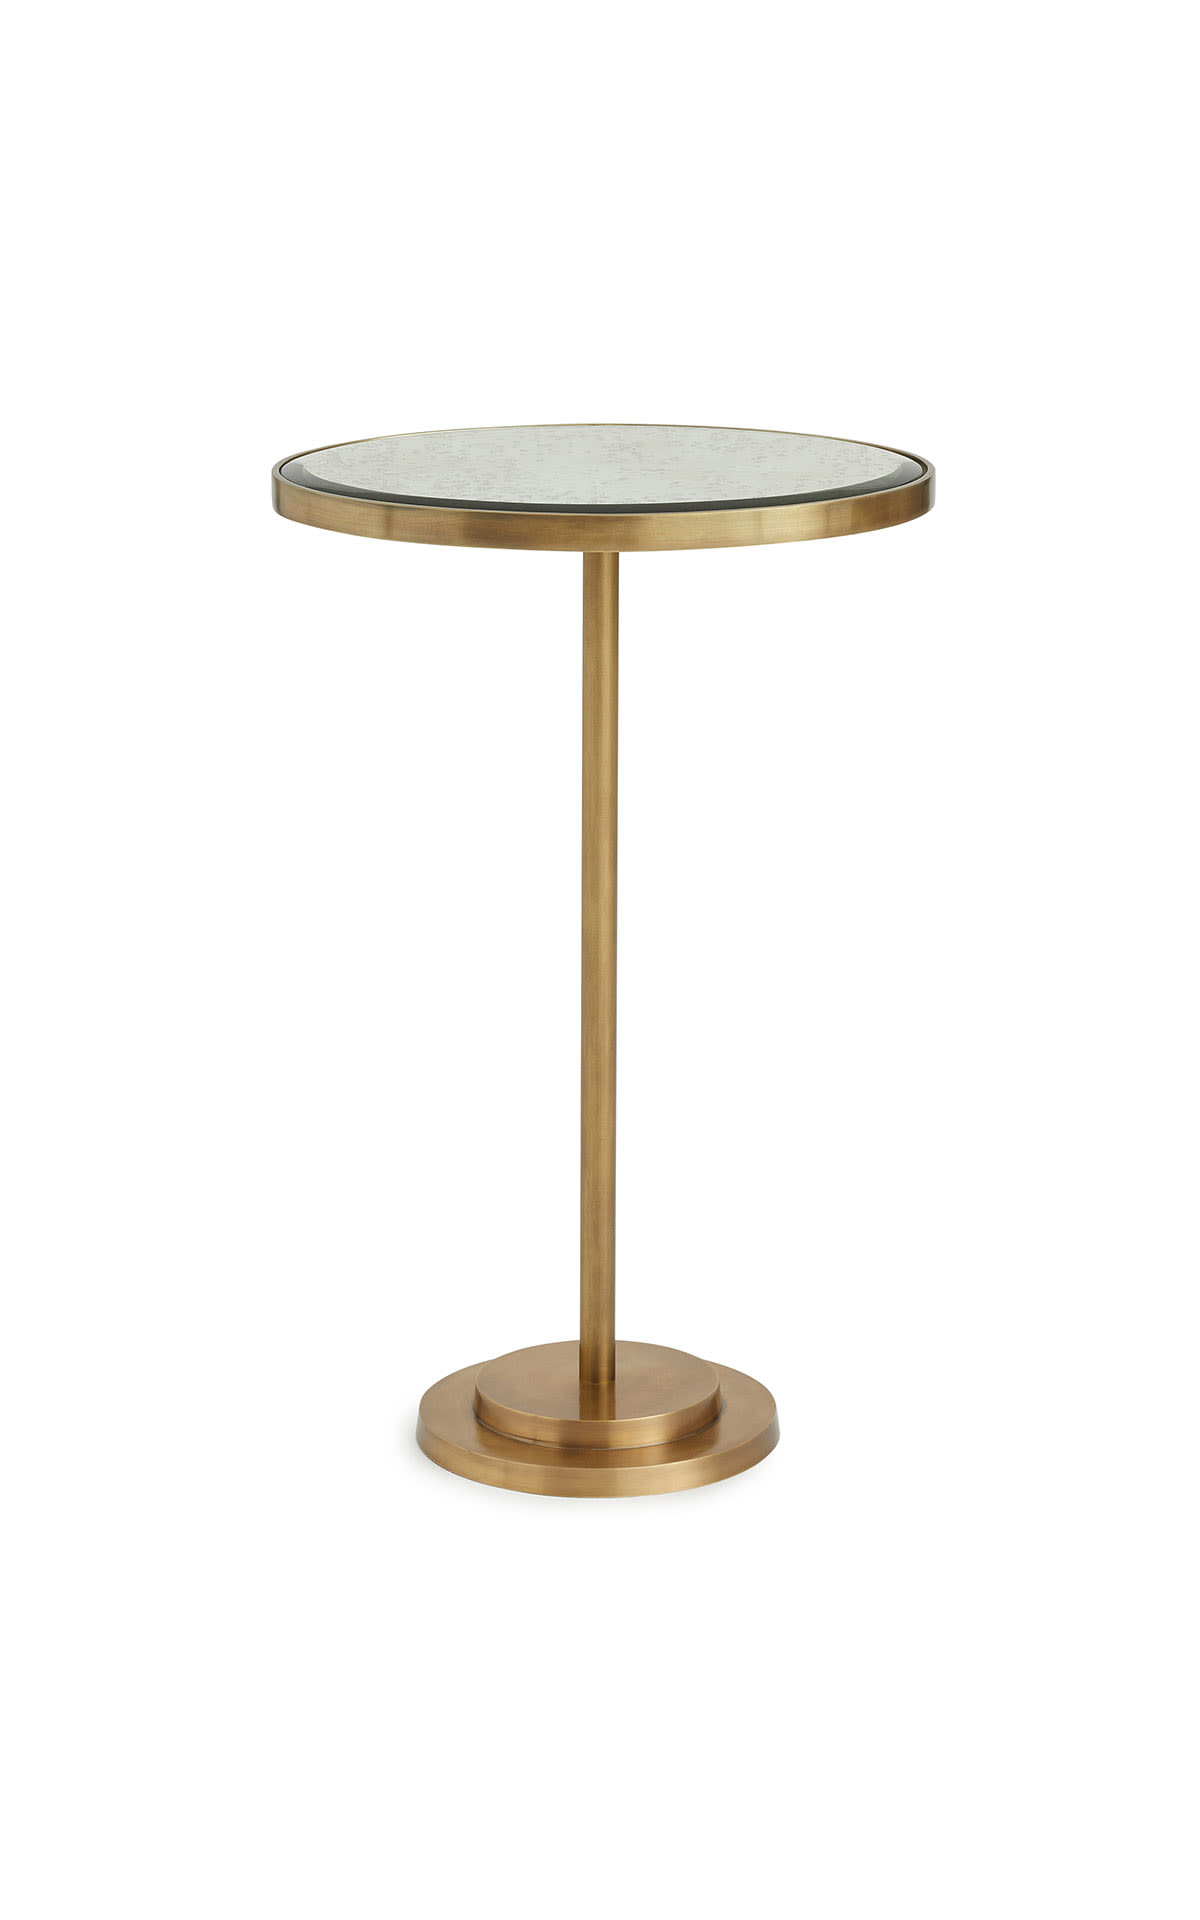 Soho Home Soho cinema side table from Bicester Village